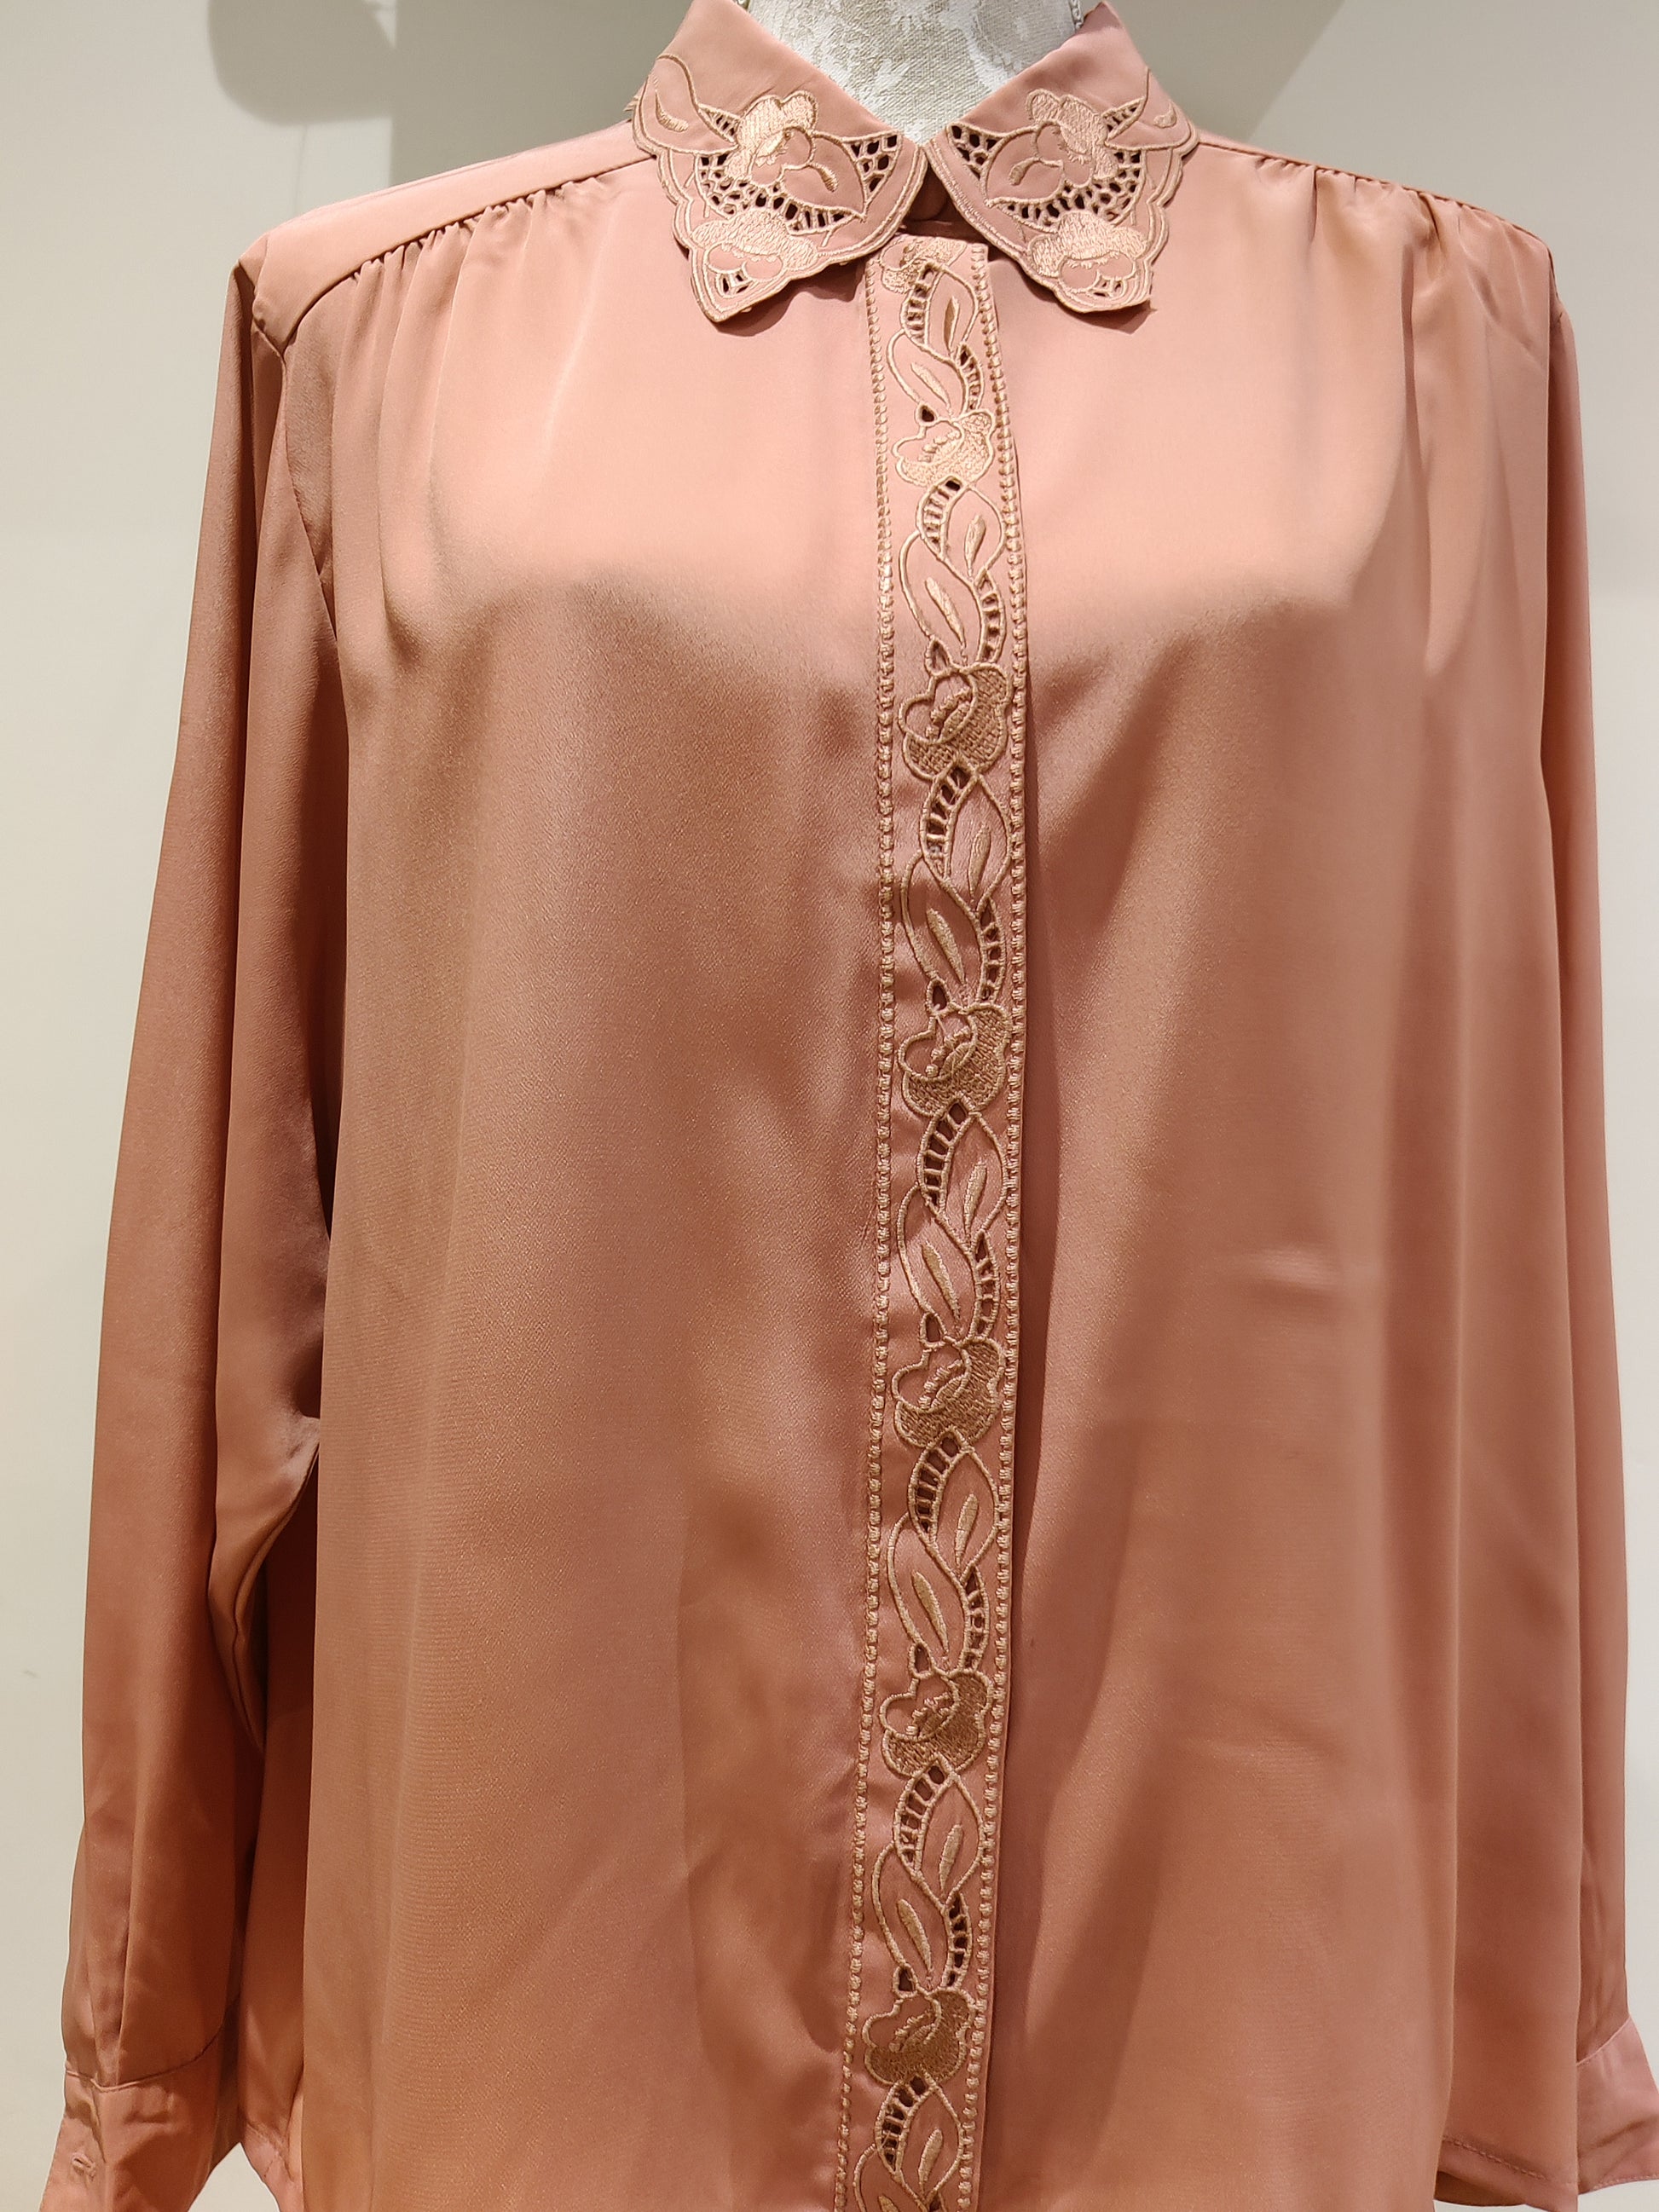 pink 80s blouse with floral statement collar. plus size